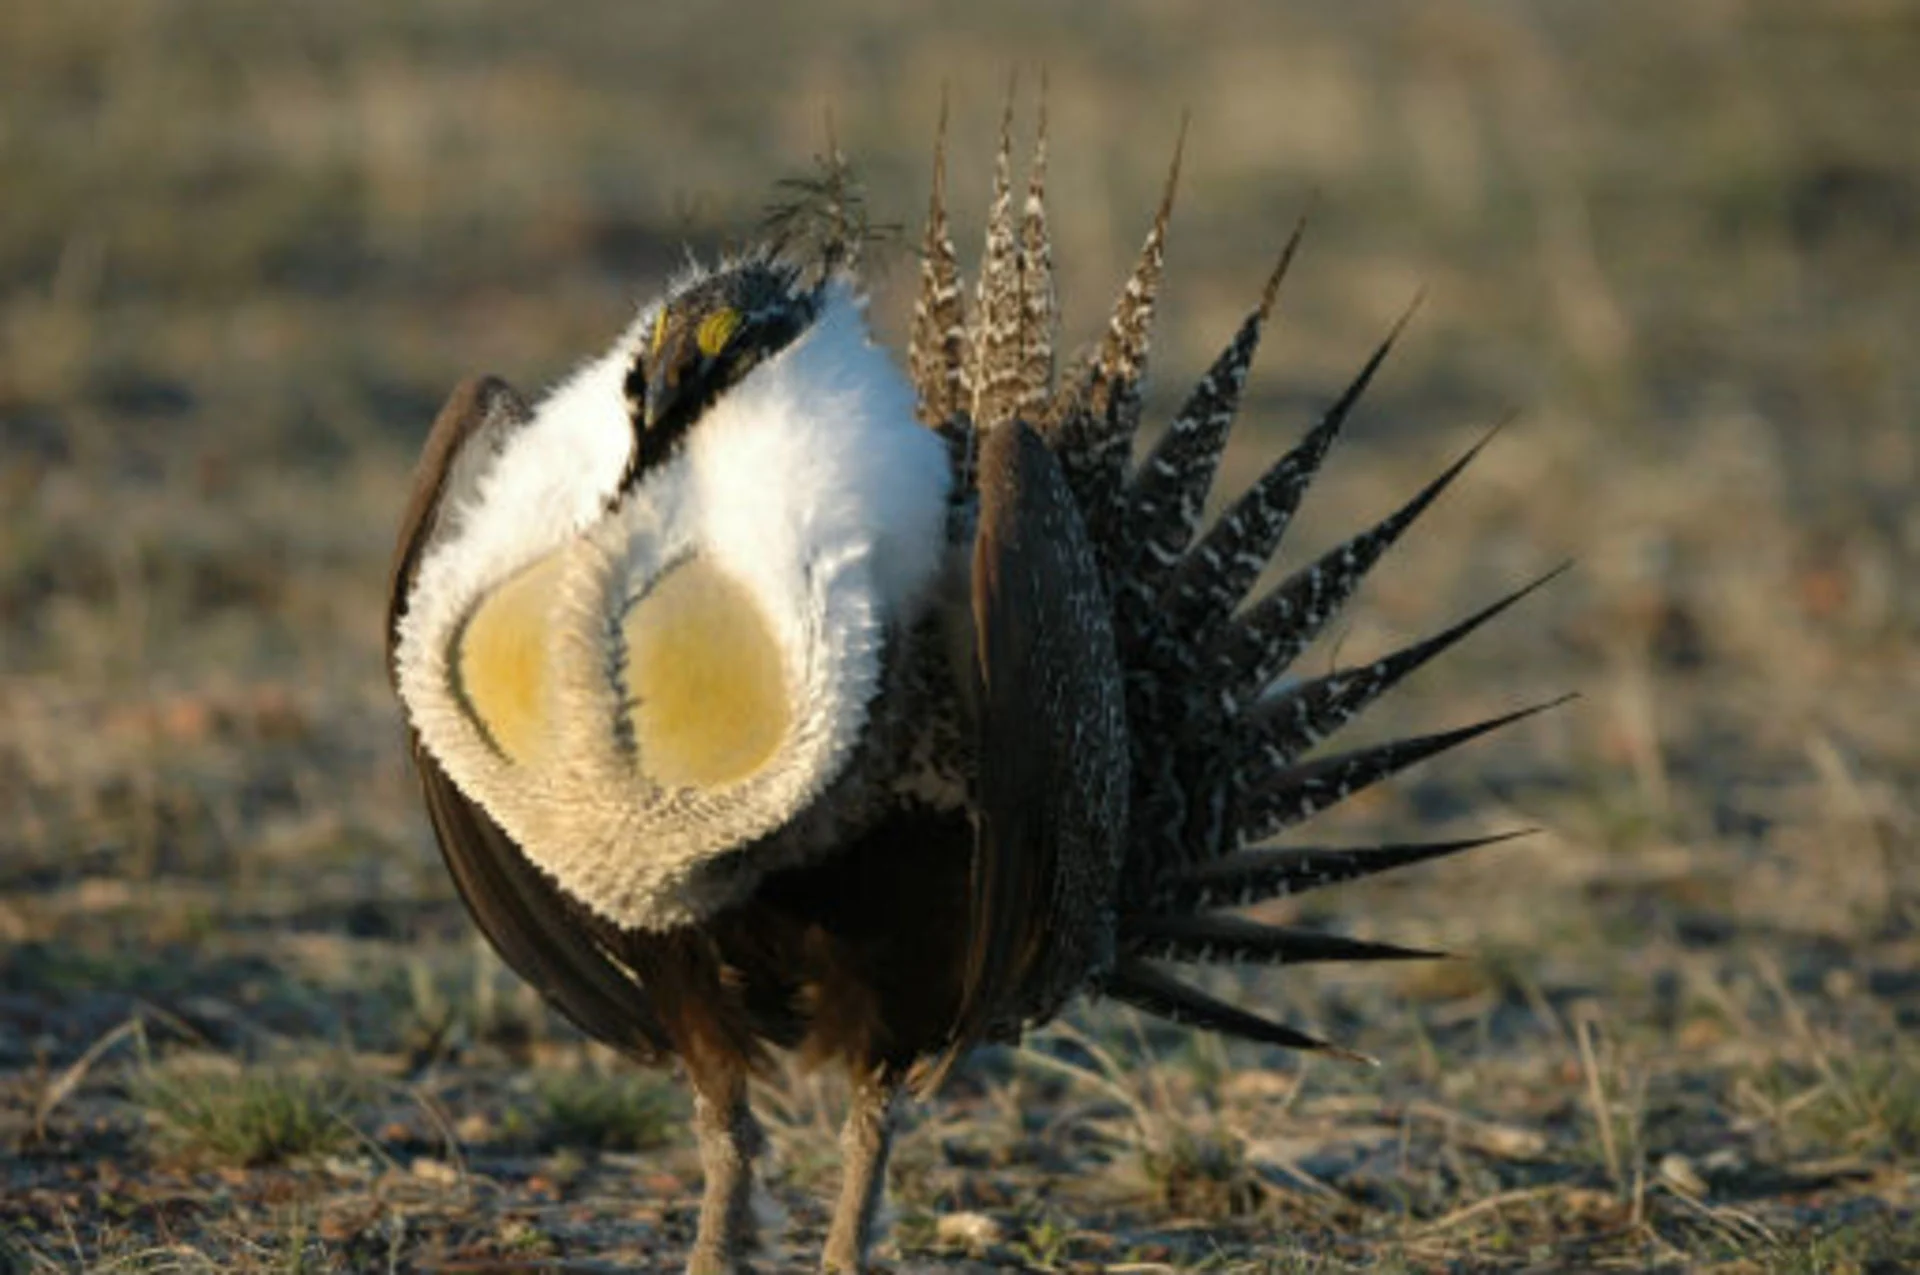 Drought plays a role in endangered sage grouse decline on the Prairies